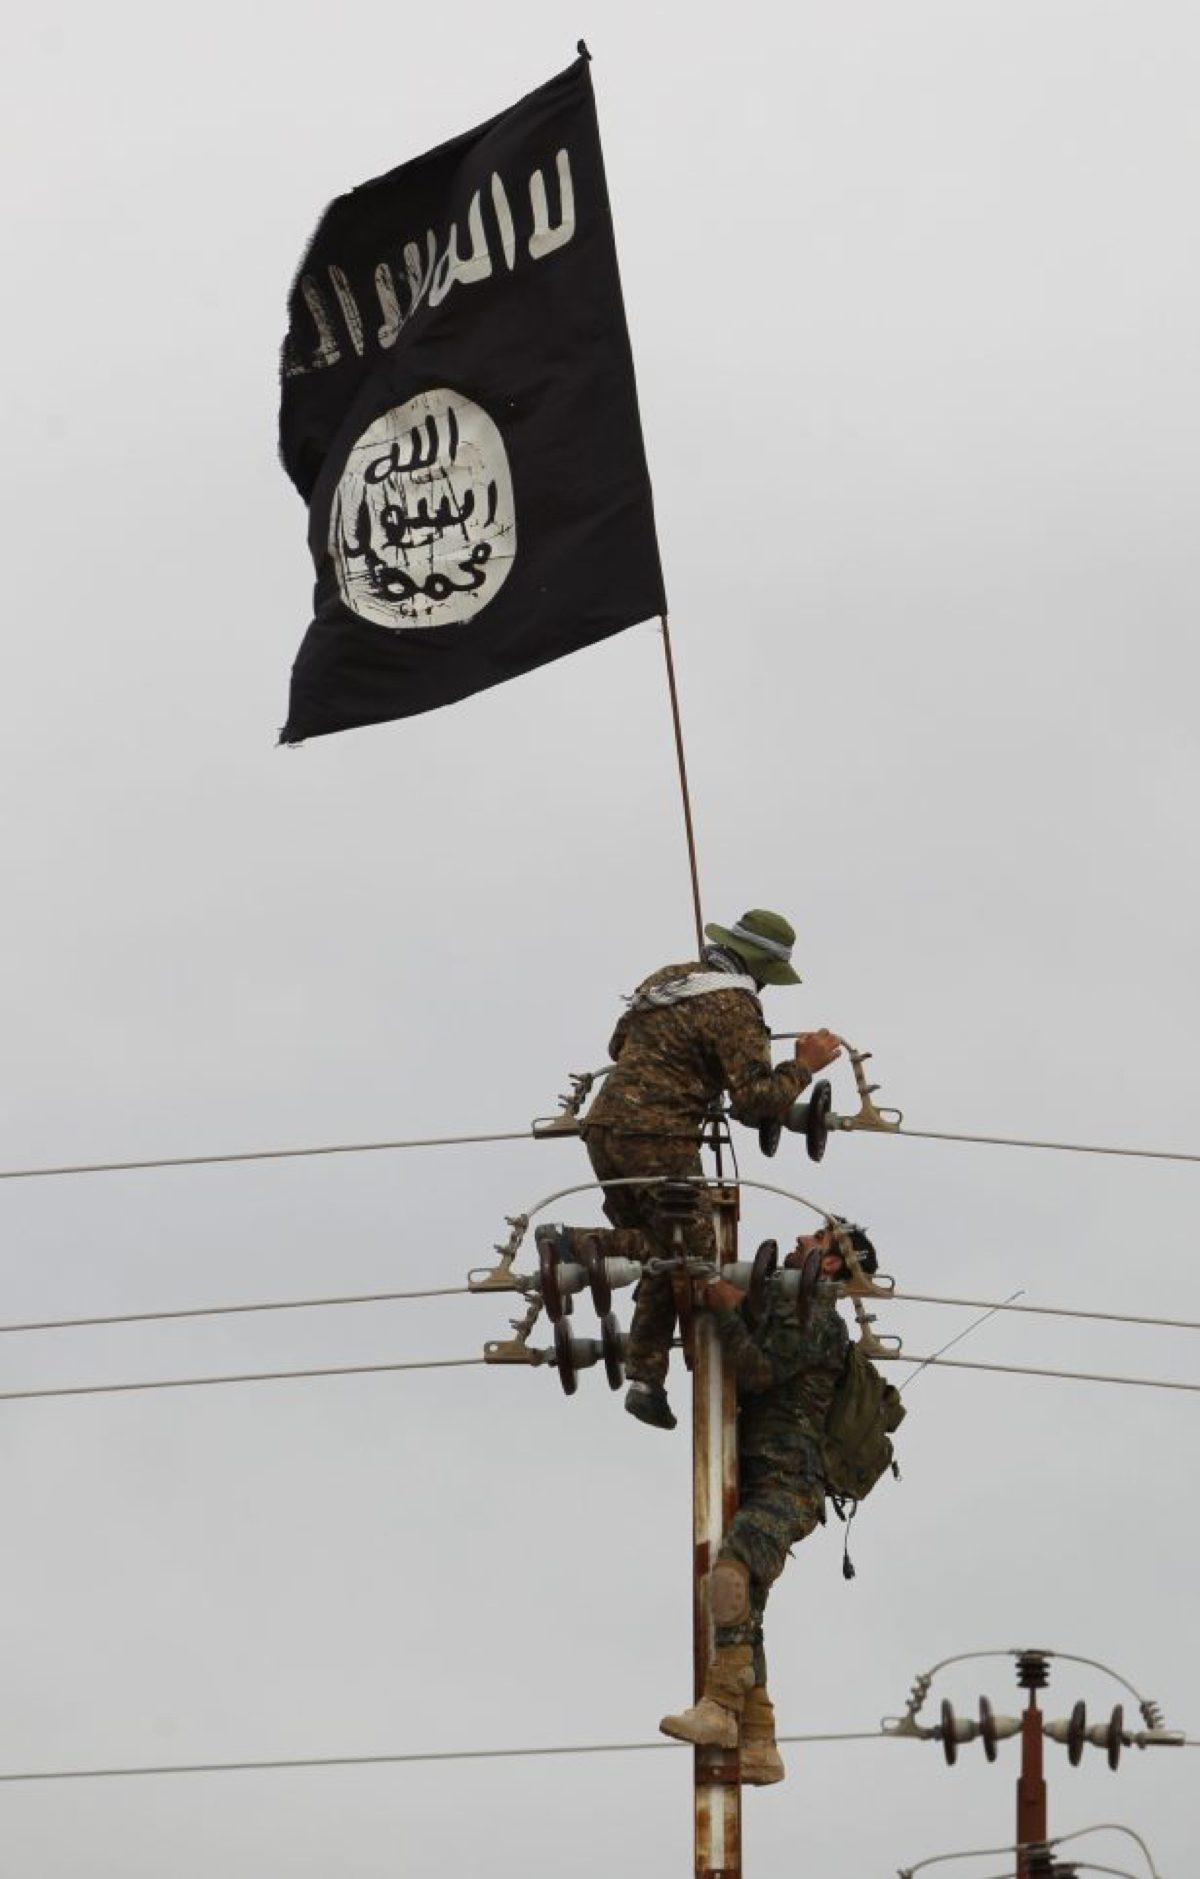 An ISIS flag is taken down from an electricity pole in Samarra, Iraq, on March 3, 2016. (Ahmad Al-Rubaye/AFP/Getty Images)